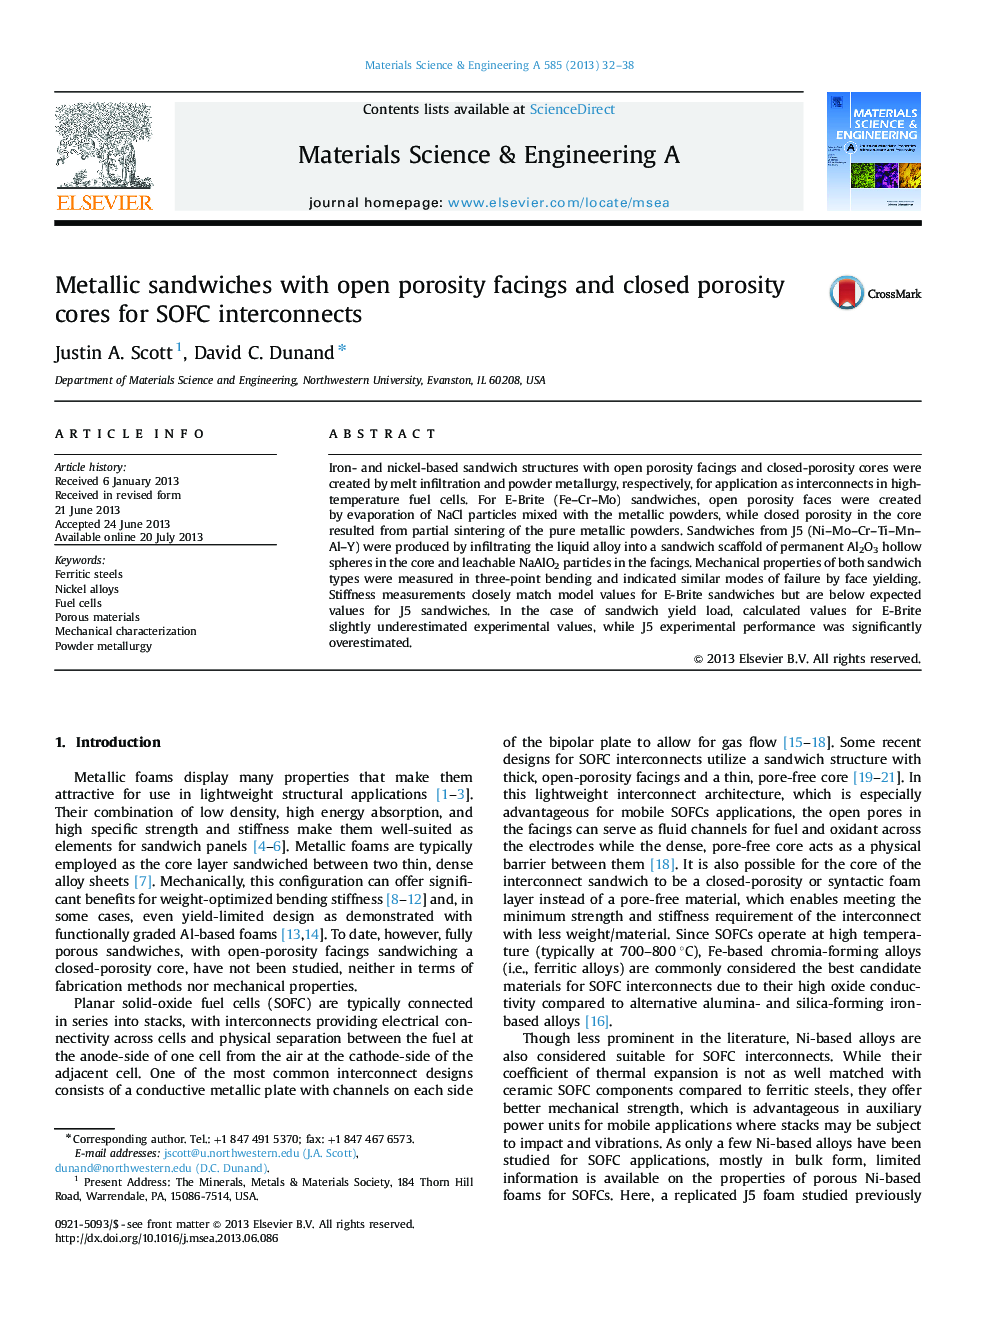 Metallic sandwiches with open porosity facings and closed porosity cores for SOFC interconnects